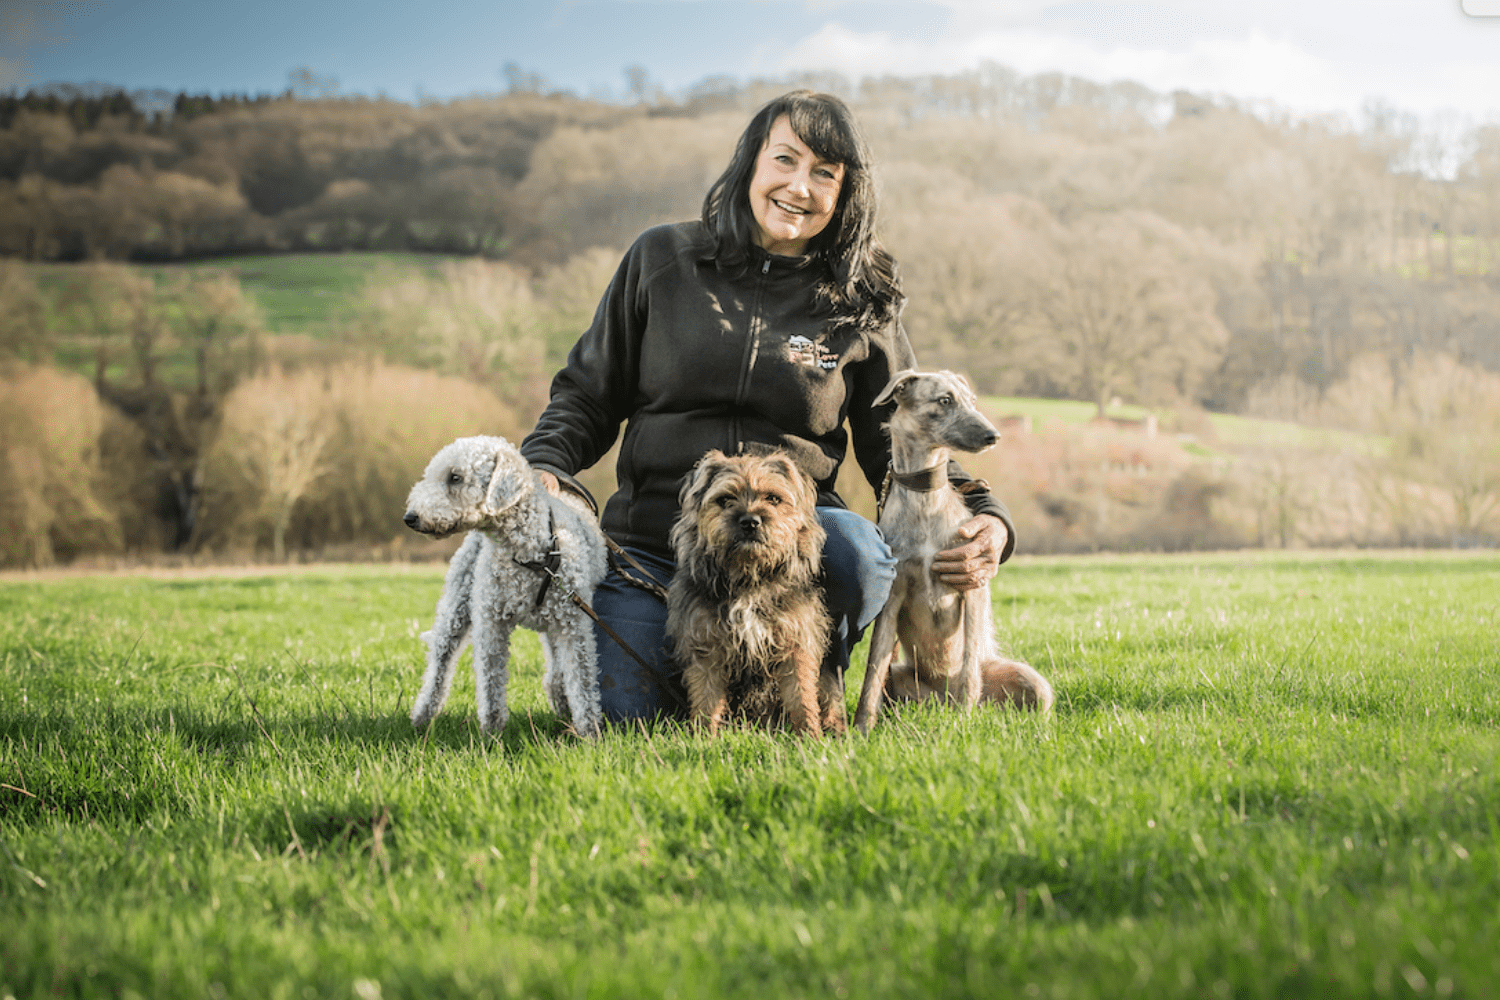 Woman crouched down holding three dogs